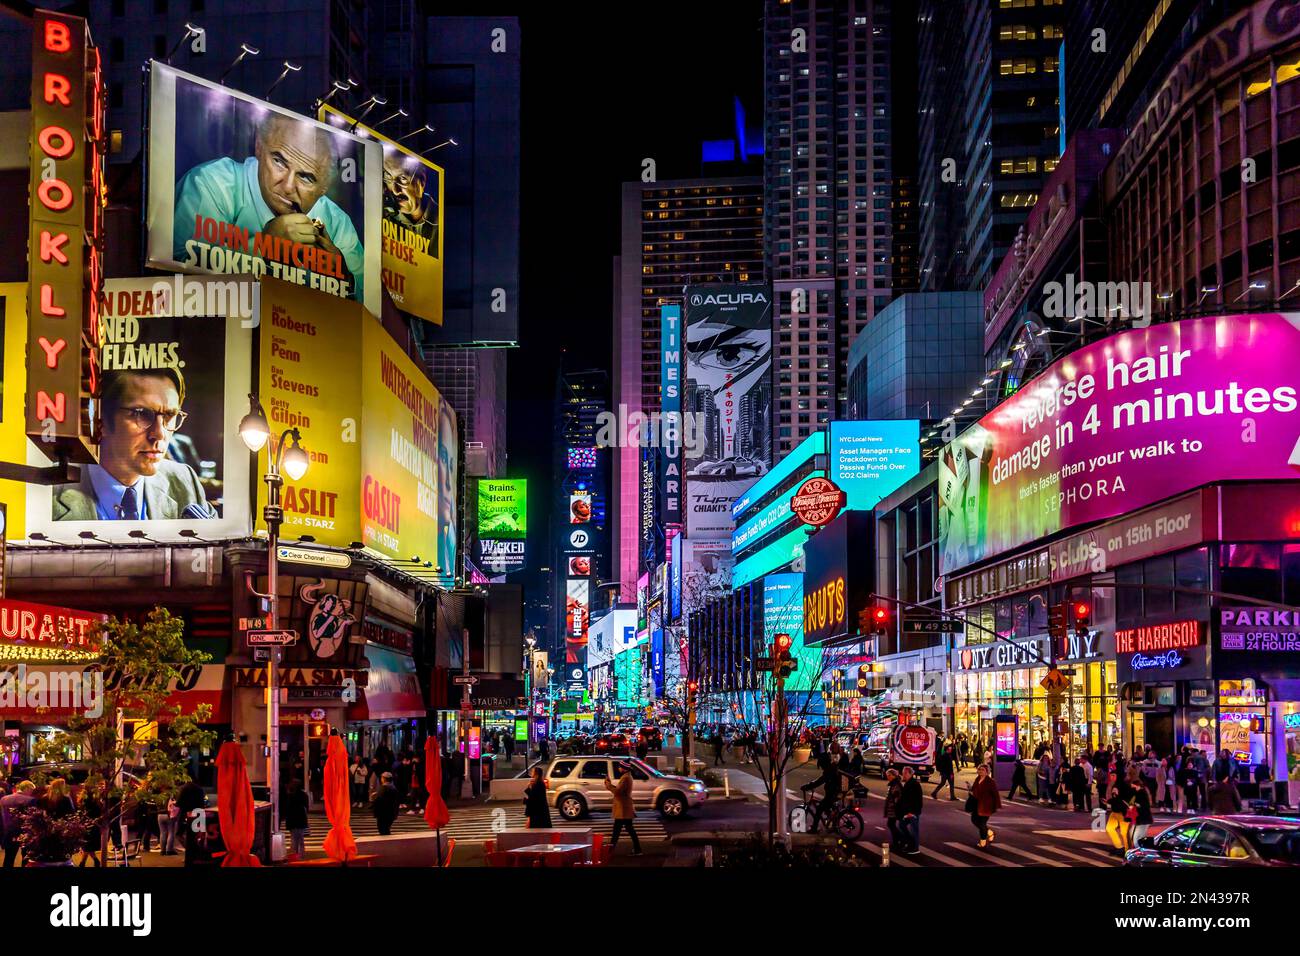 New York, USA - April 24, 2022: Times Square with tourists. Iconified as "The Crossroads of the World" it's the brightly illuminated hub of the Broadw Stock Photo